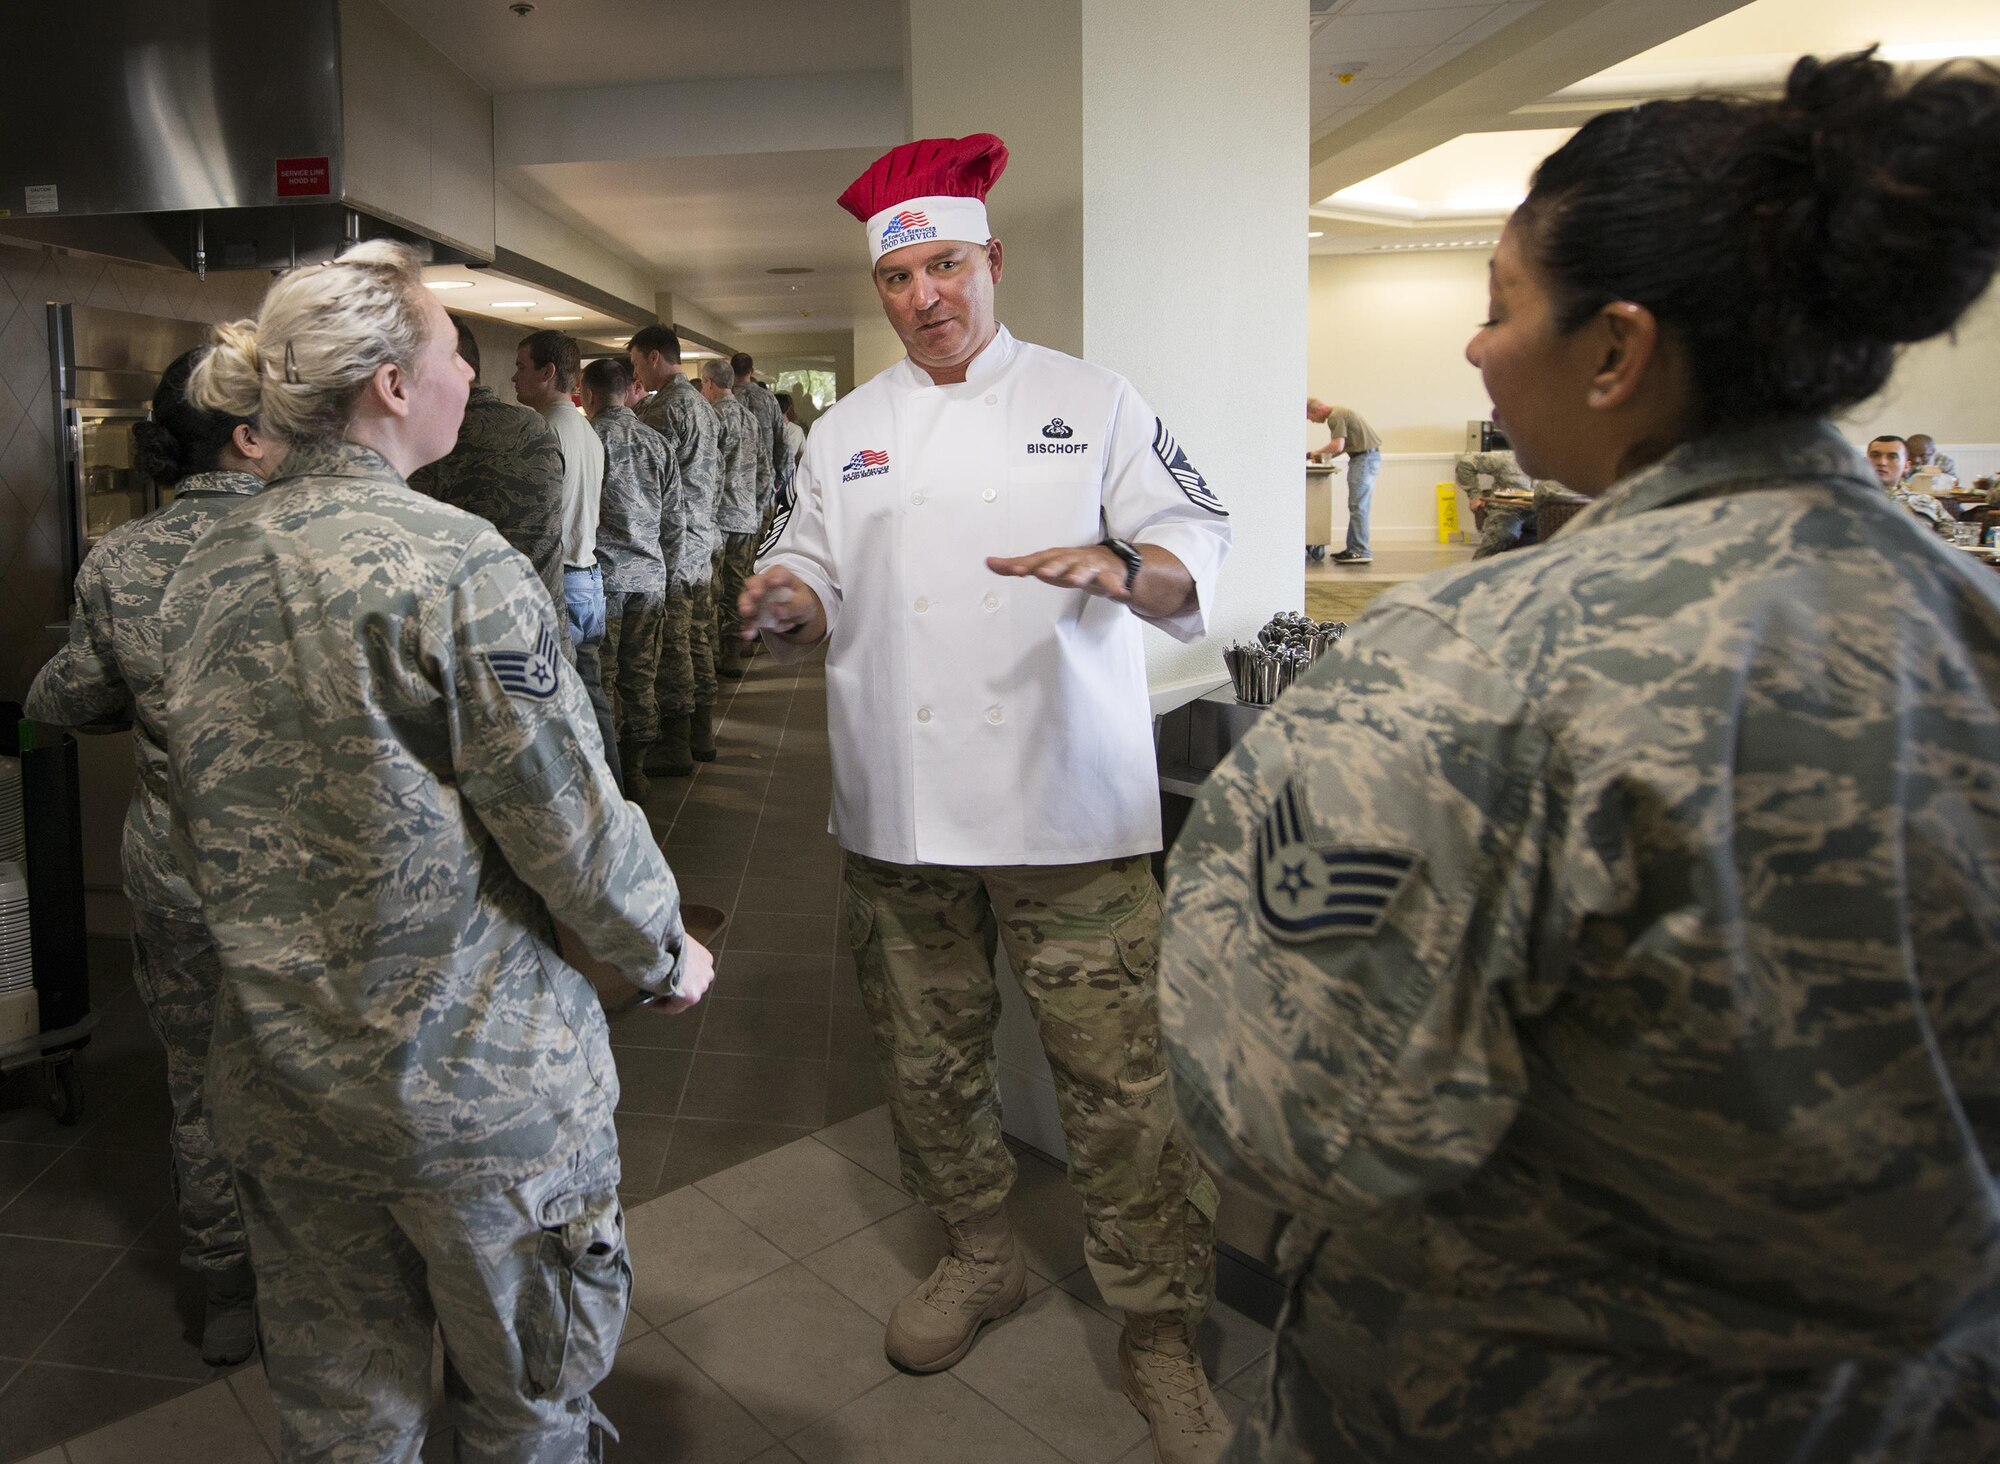 Chief Master Sgt. Brian Bischoff, the 919th Special Operations Wing command chief, talks with Airmen at the newly reopened dining facility at Duke Field, Nov. 5.  The chief was there with other wing leadership to serve the holiday meal.  The dining facility was shut down for more than a year while undergoing renovations.  (U.S. Air Force photo/Tech. Sgt. Jasmin Taylor)